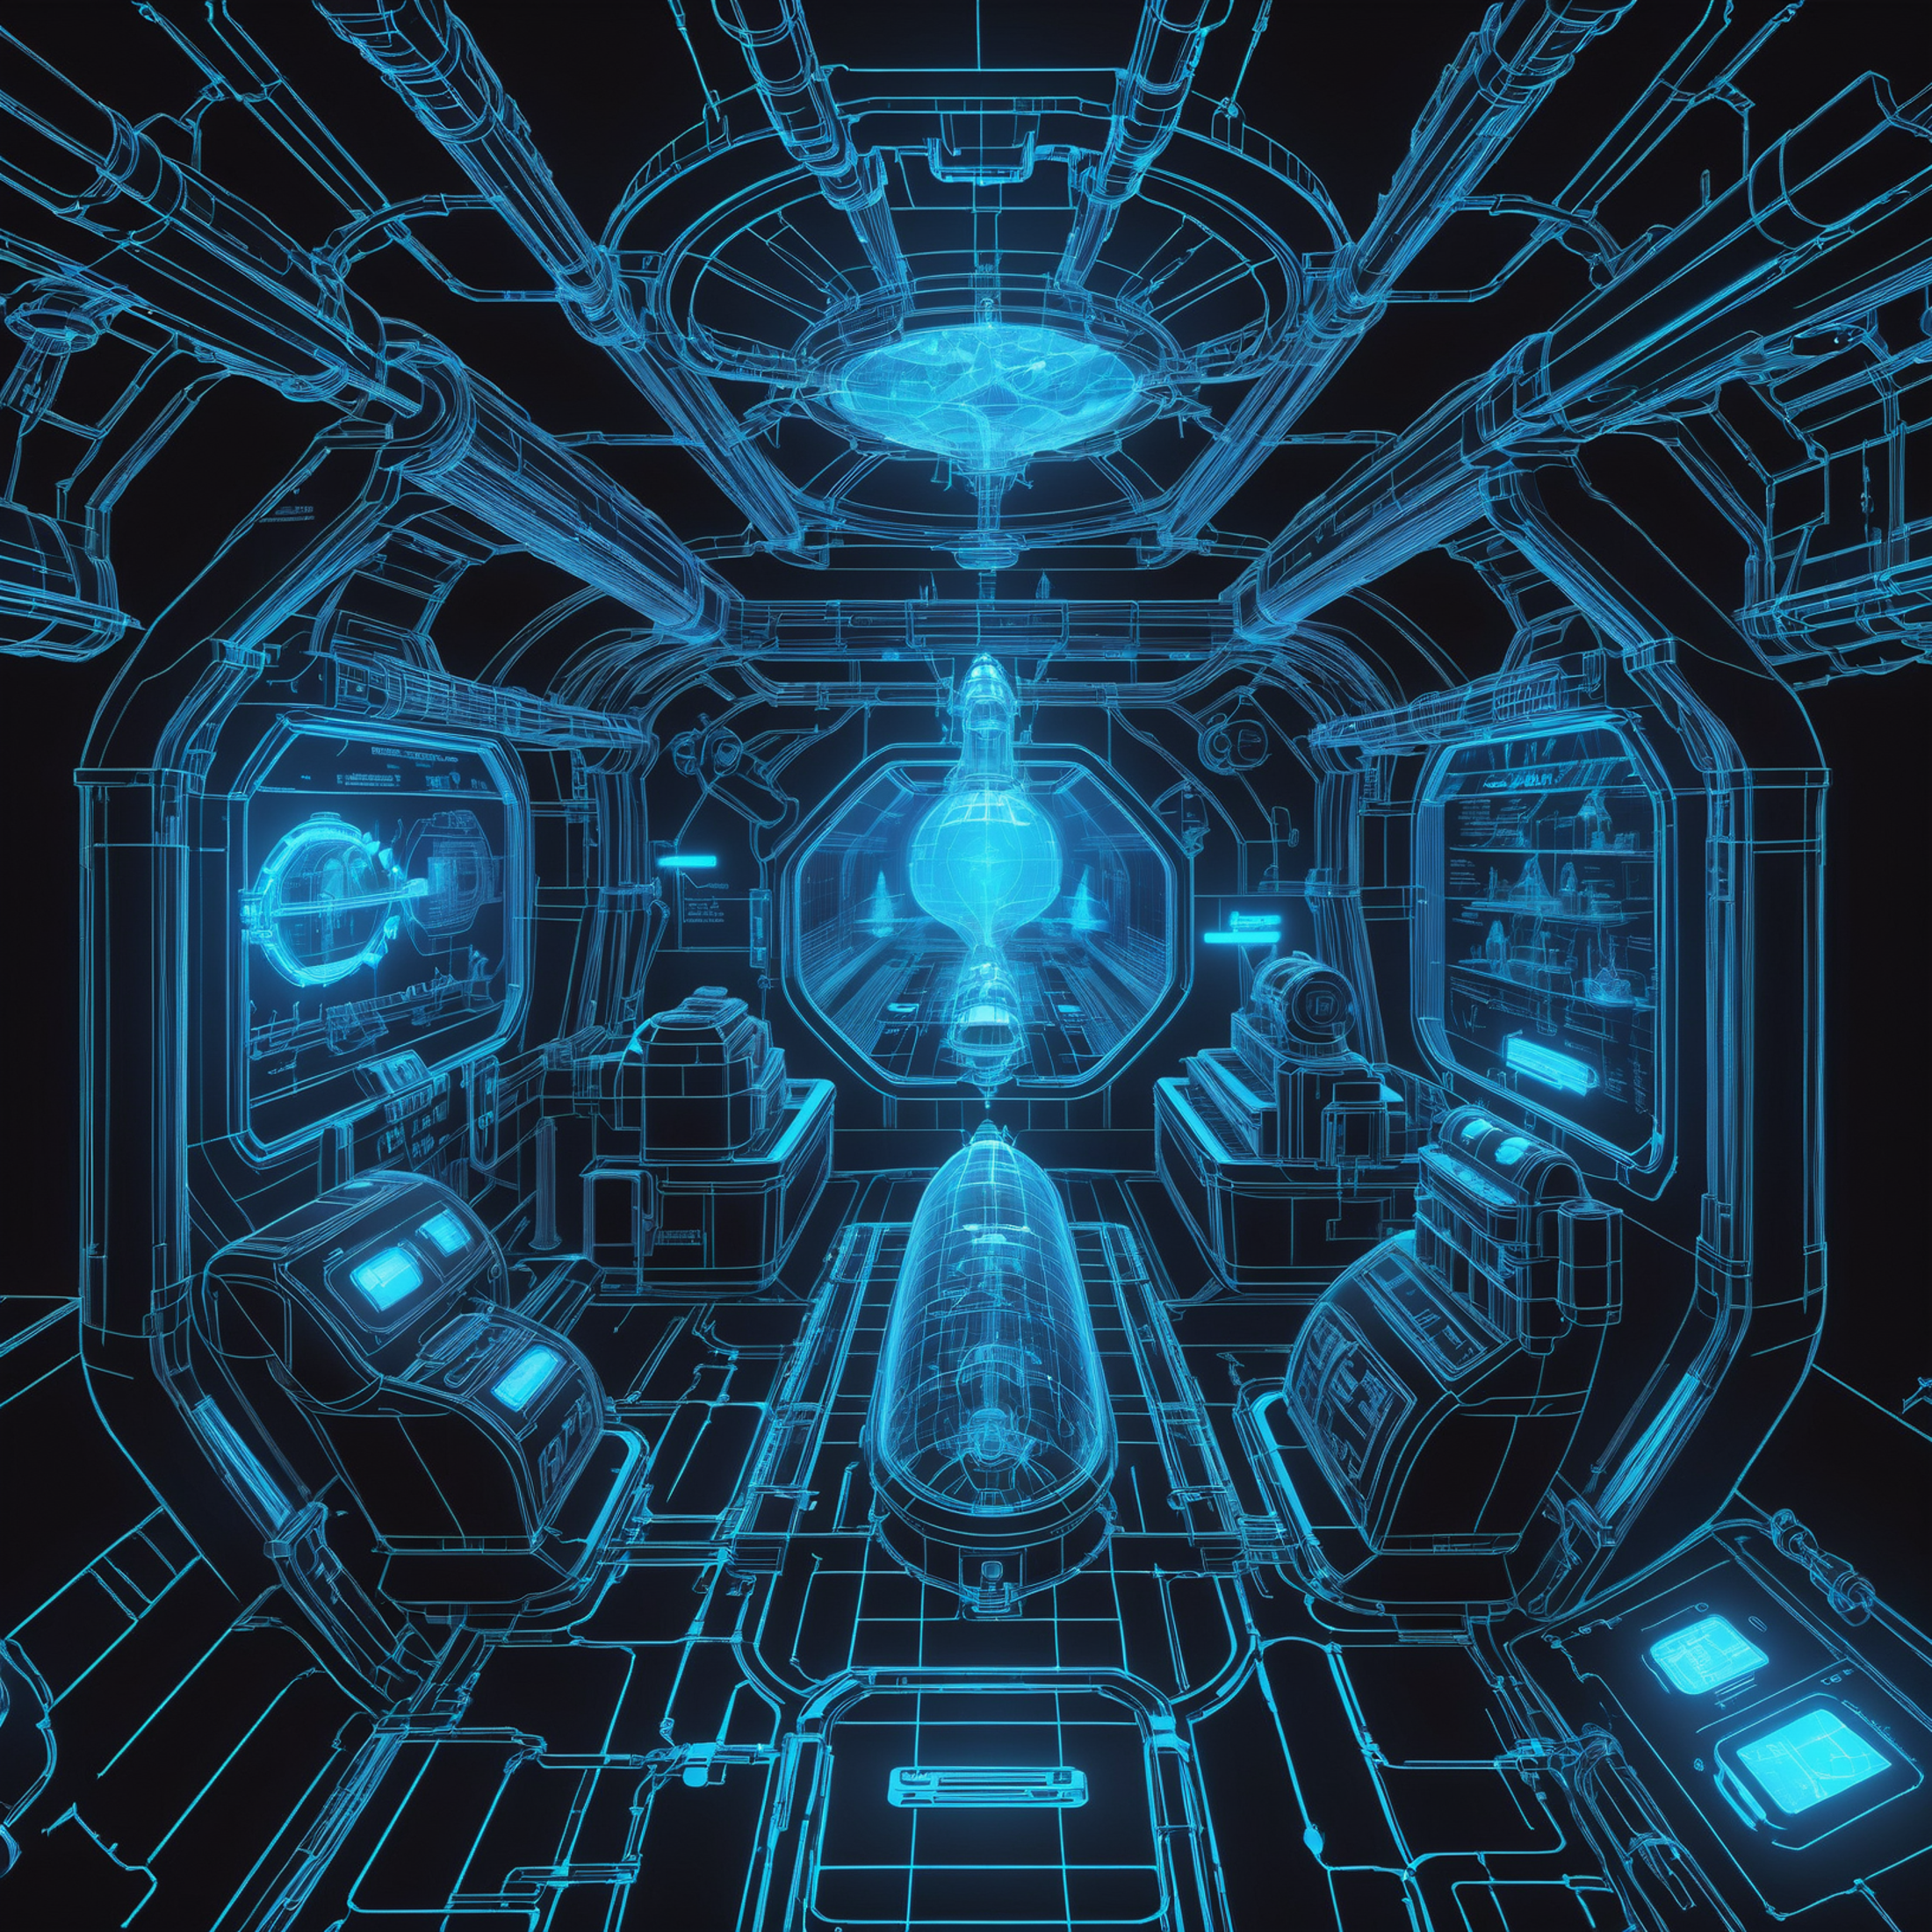 glowing blue on black 3d wireframe, diagram, cyberpunk, noon, scenery, Mad Scientist Echoing canyon by a interior of a sub...